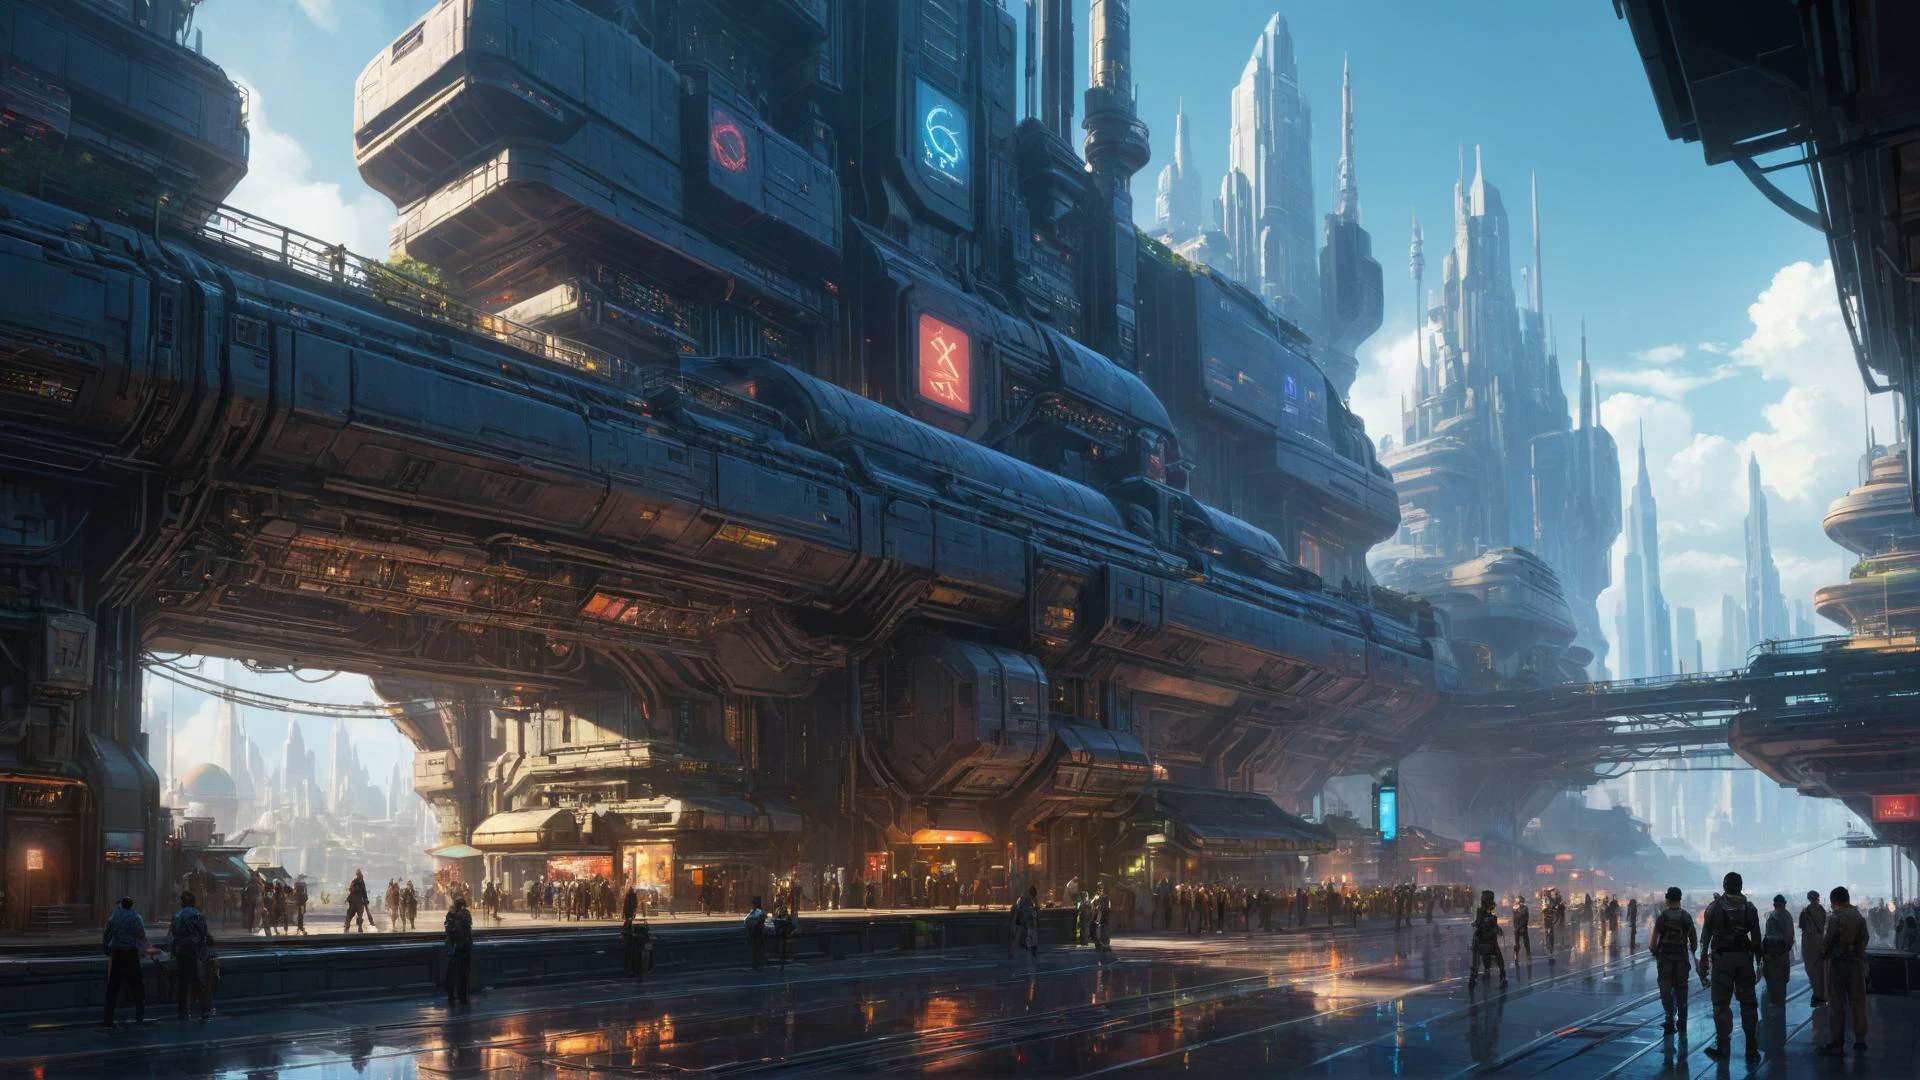 SK_DIGITALART, painting of a cyberpunk megastructure outside of time, an exotic distant world, by Ian McQue, 
highly impressive & realistic, Hyper-detailed, Insane Details, Intricate Details, Cinematics, Editorial Art, Tilt Blur, Super-Resolution, Megapixels, Unreal Engine 5, Studio Lighting, Volumetric, Optical, Diffusion Glowing, Shadows, Proportions, Rough, Shimmery, Ray Tracing Reflections, Glossy, Lumen Reflections, Screen Space Reflections, Diffraction Rating, Chromatic Aberration, GB Shift, Ray Tracing, Ray Tracing Ambient Occlusion Anti-Ali asing, Post-Processing, Post-Production, Cel Shading, Tone Mapping, Incredibly Detailed and Intricate, Hypermaximalist, Sleek, Hyper Realistic, Super Detailed, Dynamic Pose, Hyperrealism, HDI, 8k  dramatic lighting, dark colors, wide angle view, panorama view, dominant colors Brass and Dark Blue, 
